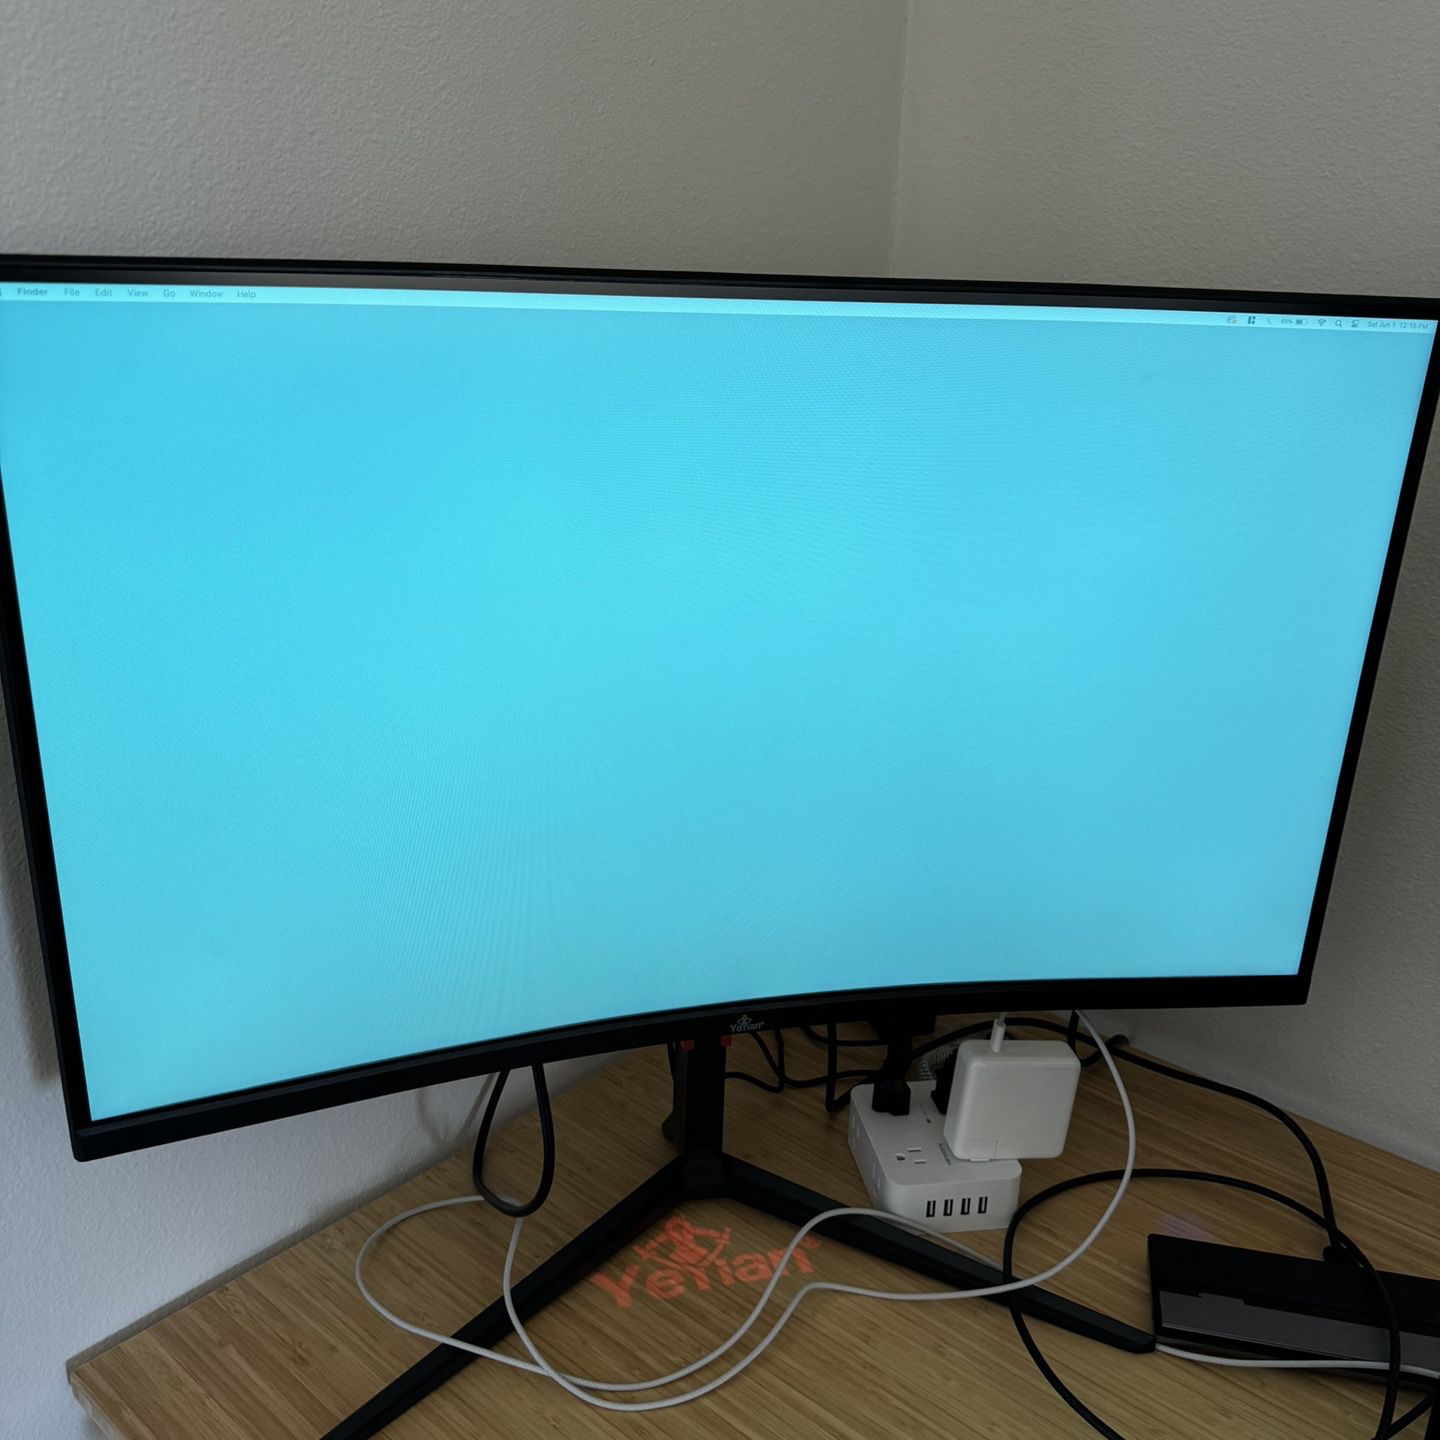 32” Curved Monitor For Just $200 (Market Price 300)